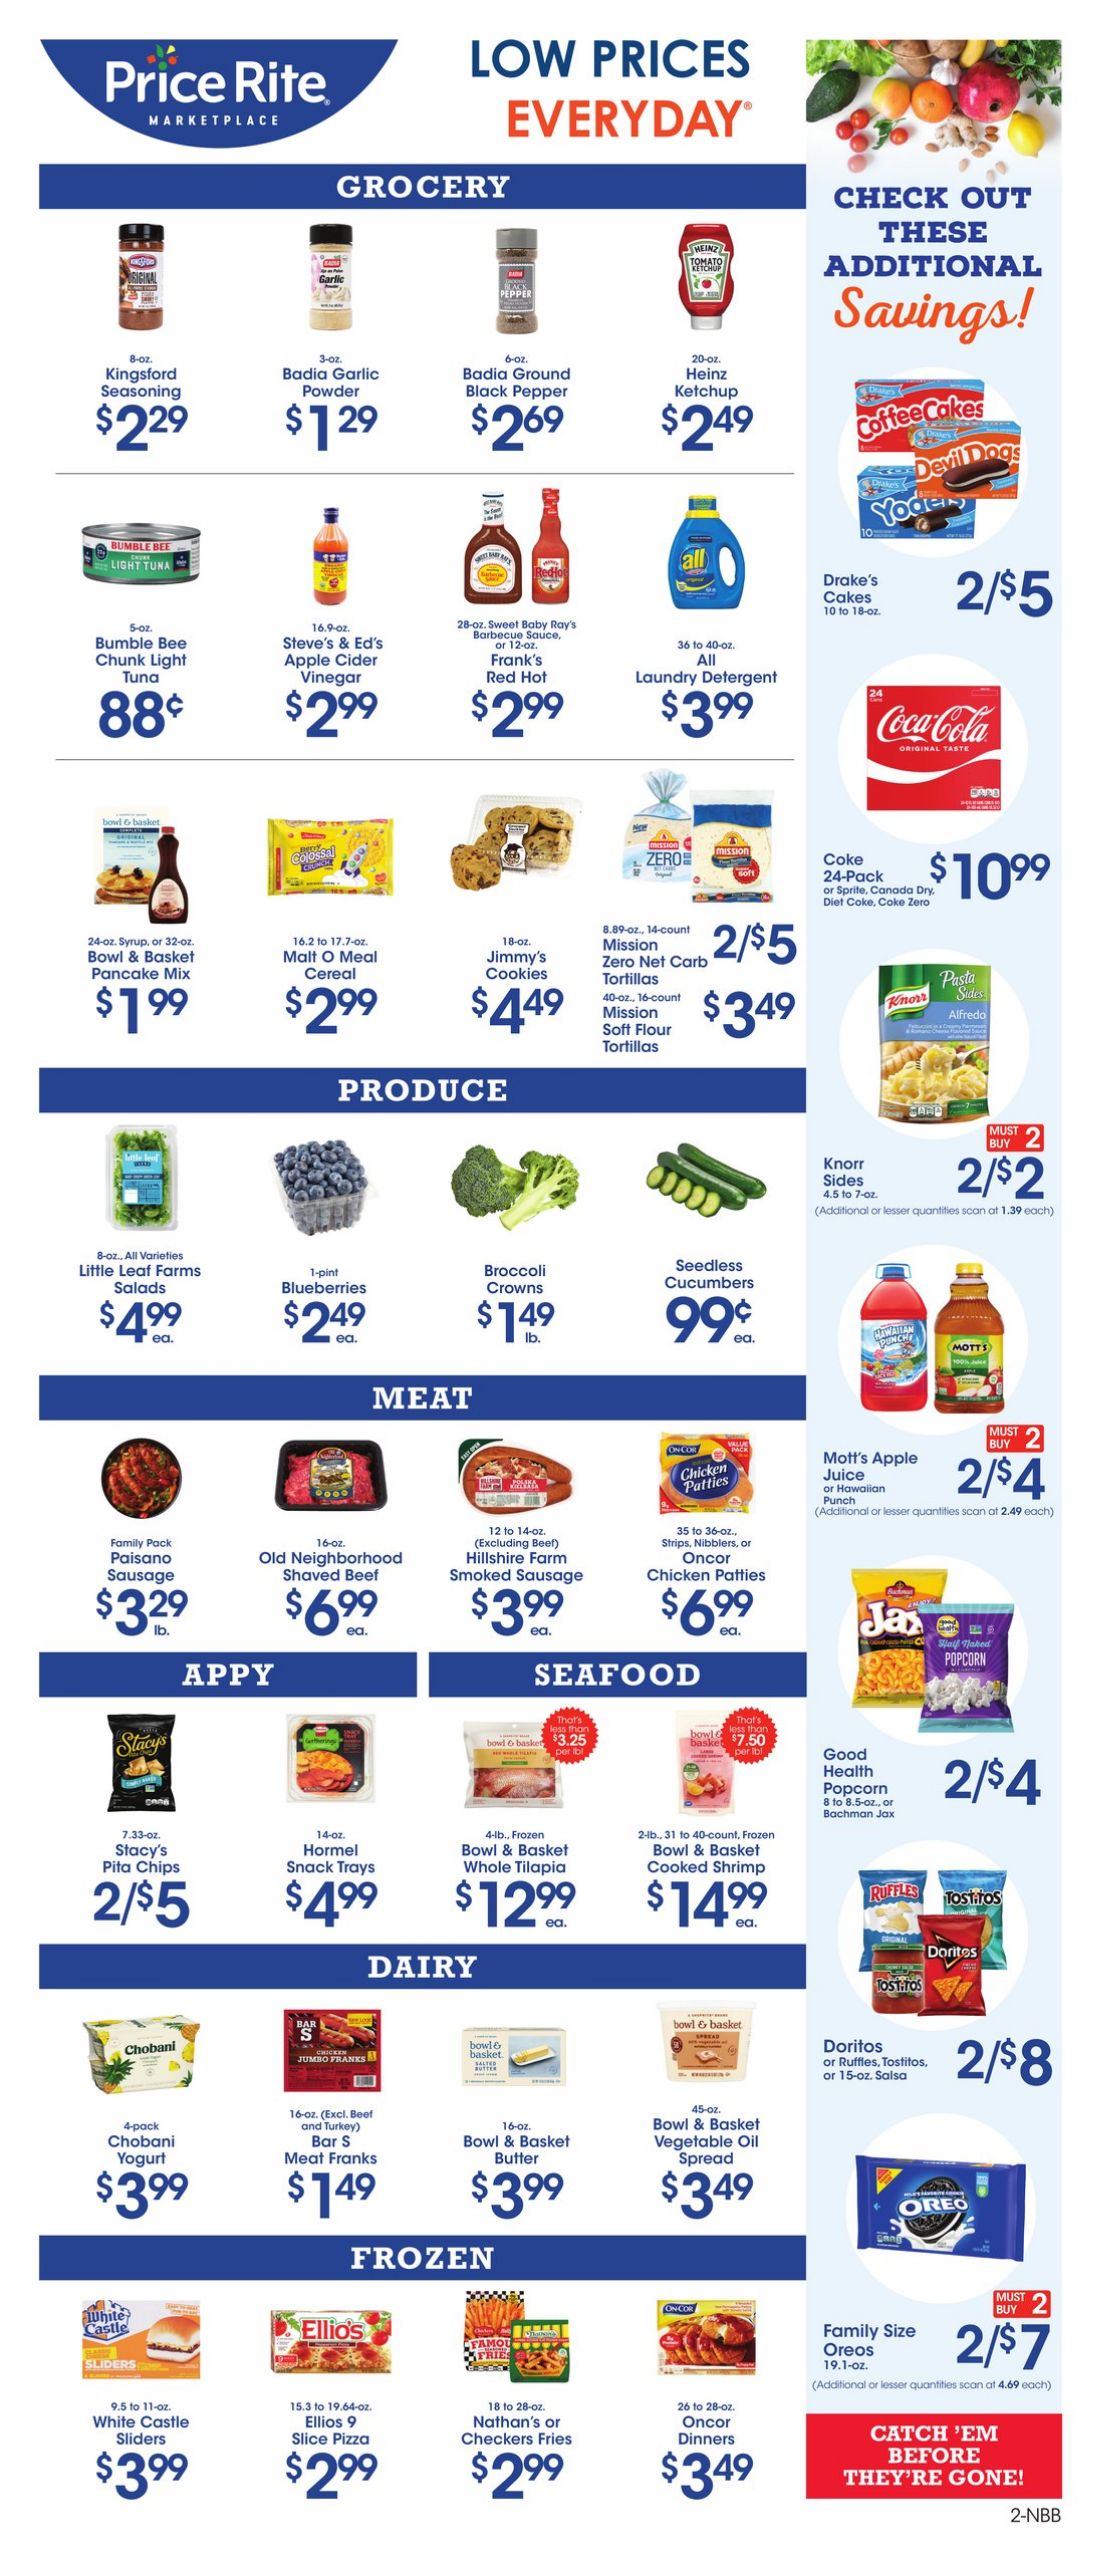 Weekly ad Price Rite 01/19/2024 - 02/01/2024